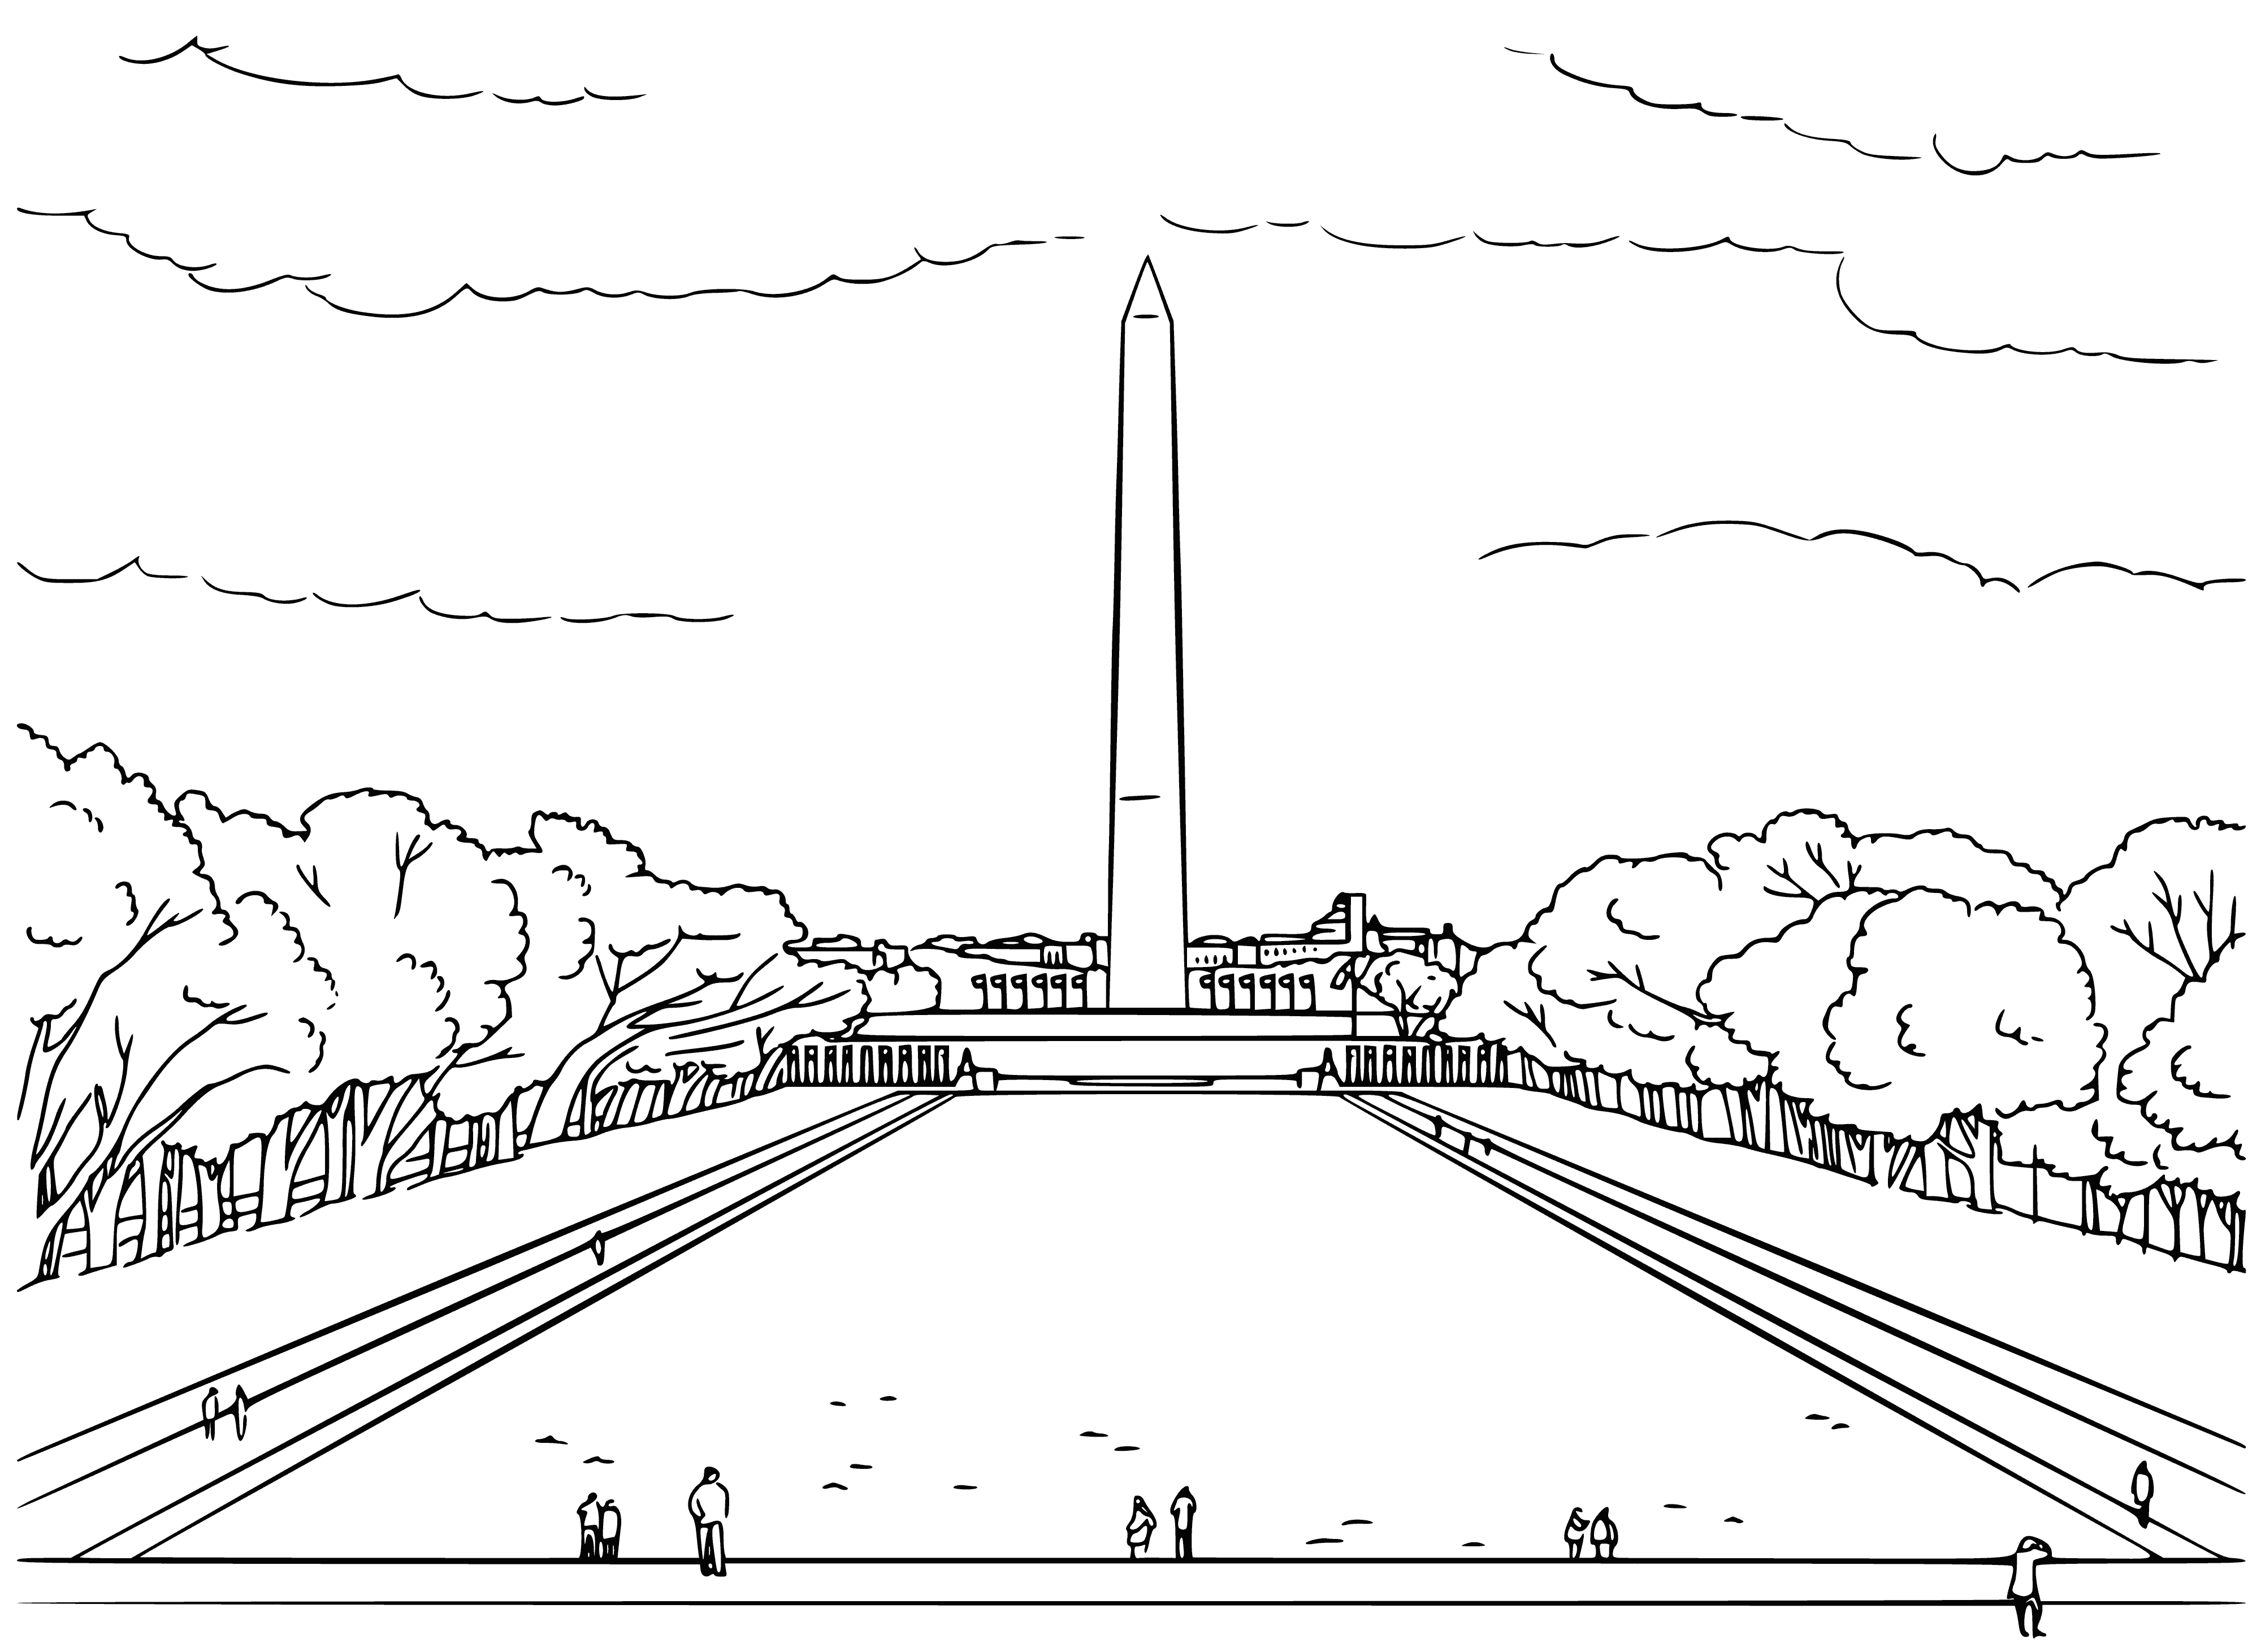 coloring page: Large marble obelisk w/pointed top, surrounded by green lawn, trees & metal fence.